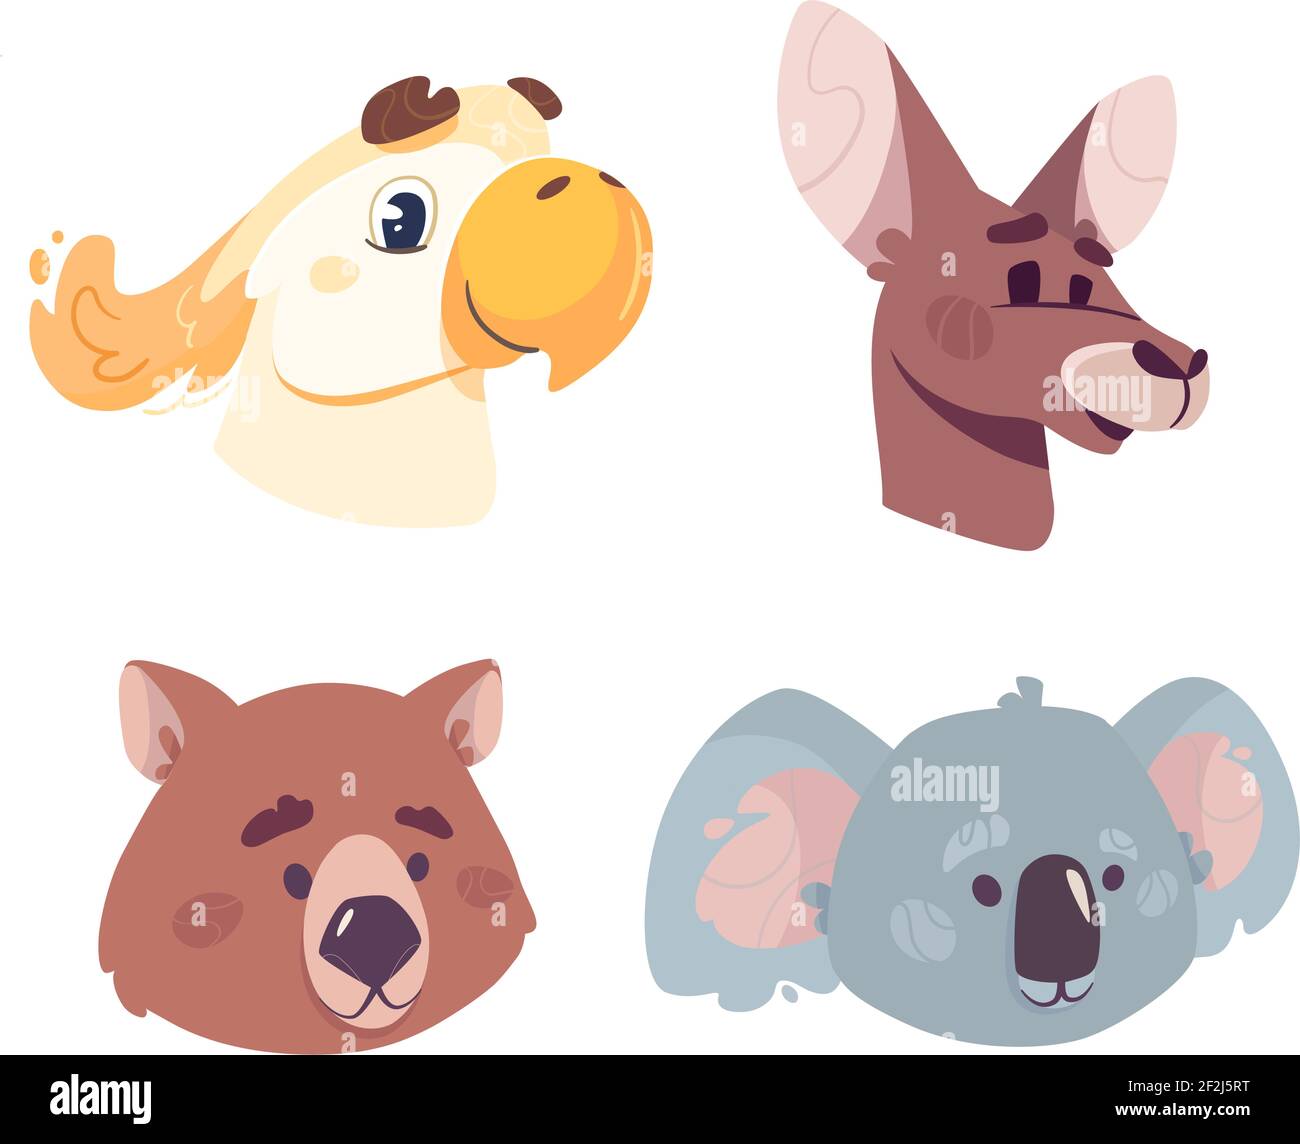 cute heads kangaroo, cockatoo, wombat and koala. Funny vector birds and animals from the Australian series. Illustrations for childrens books, encyclopedias, cards. Cartoon style isolated on white Stock Vector